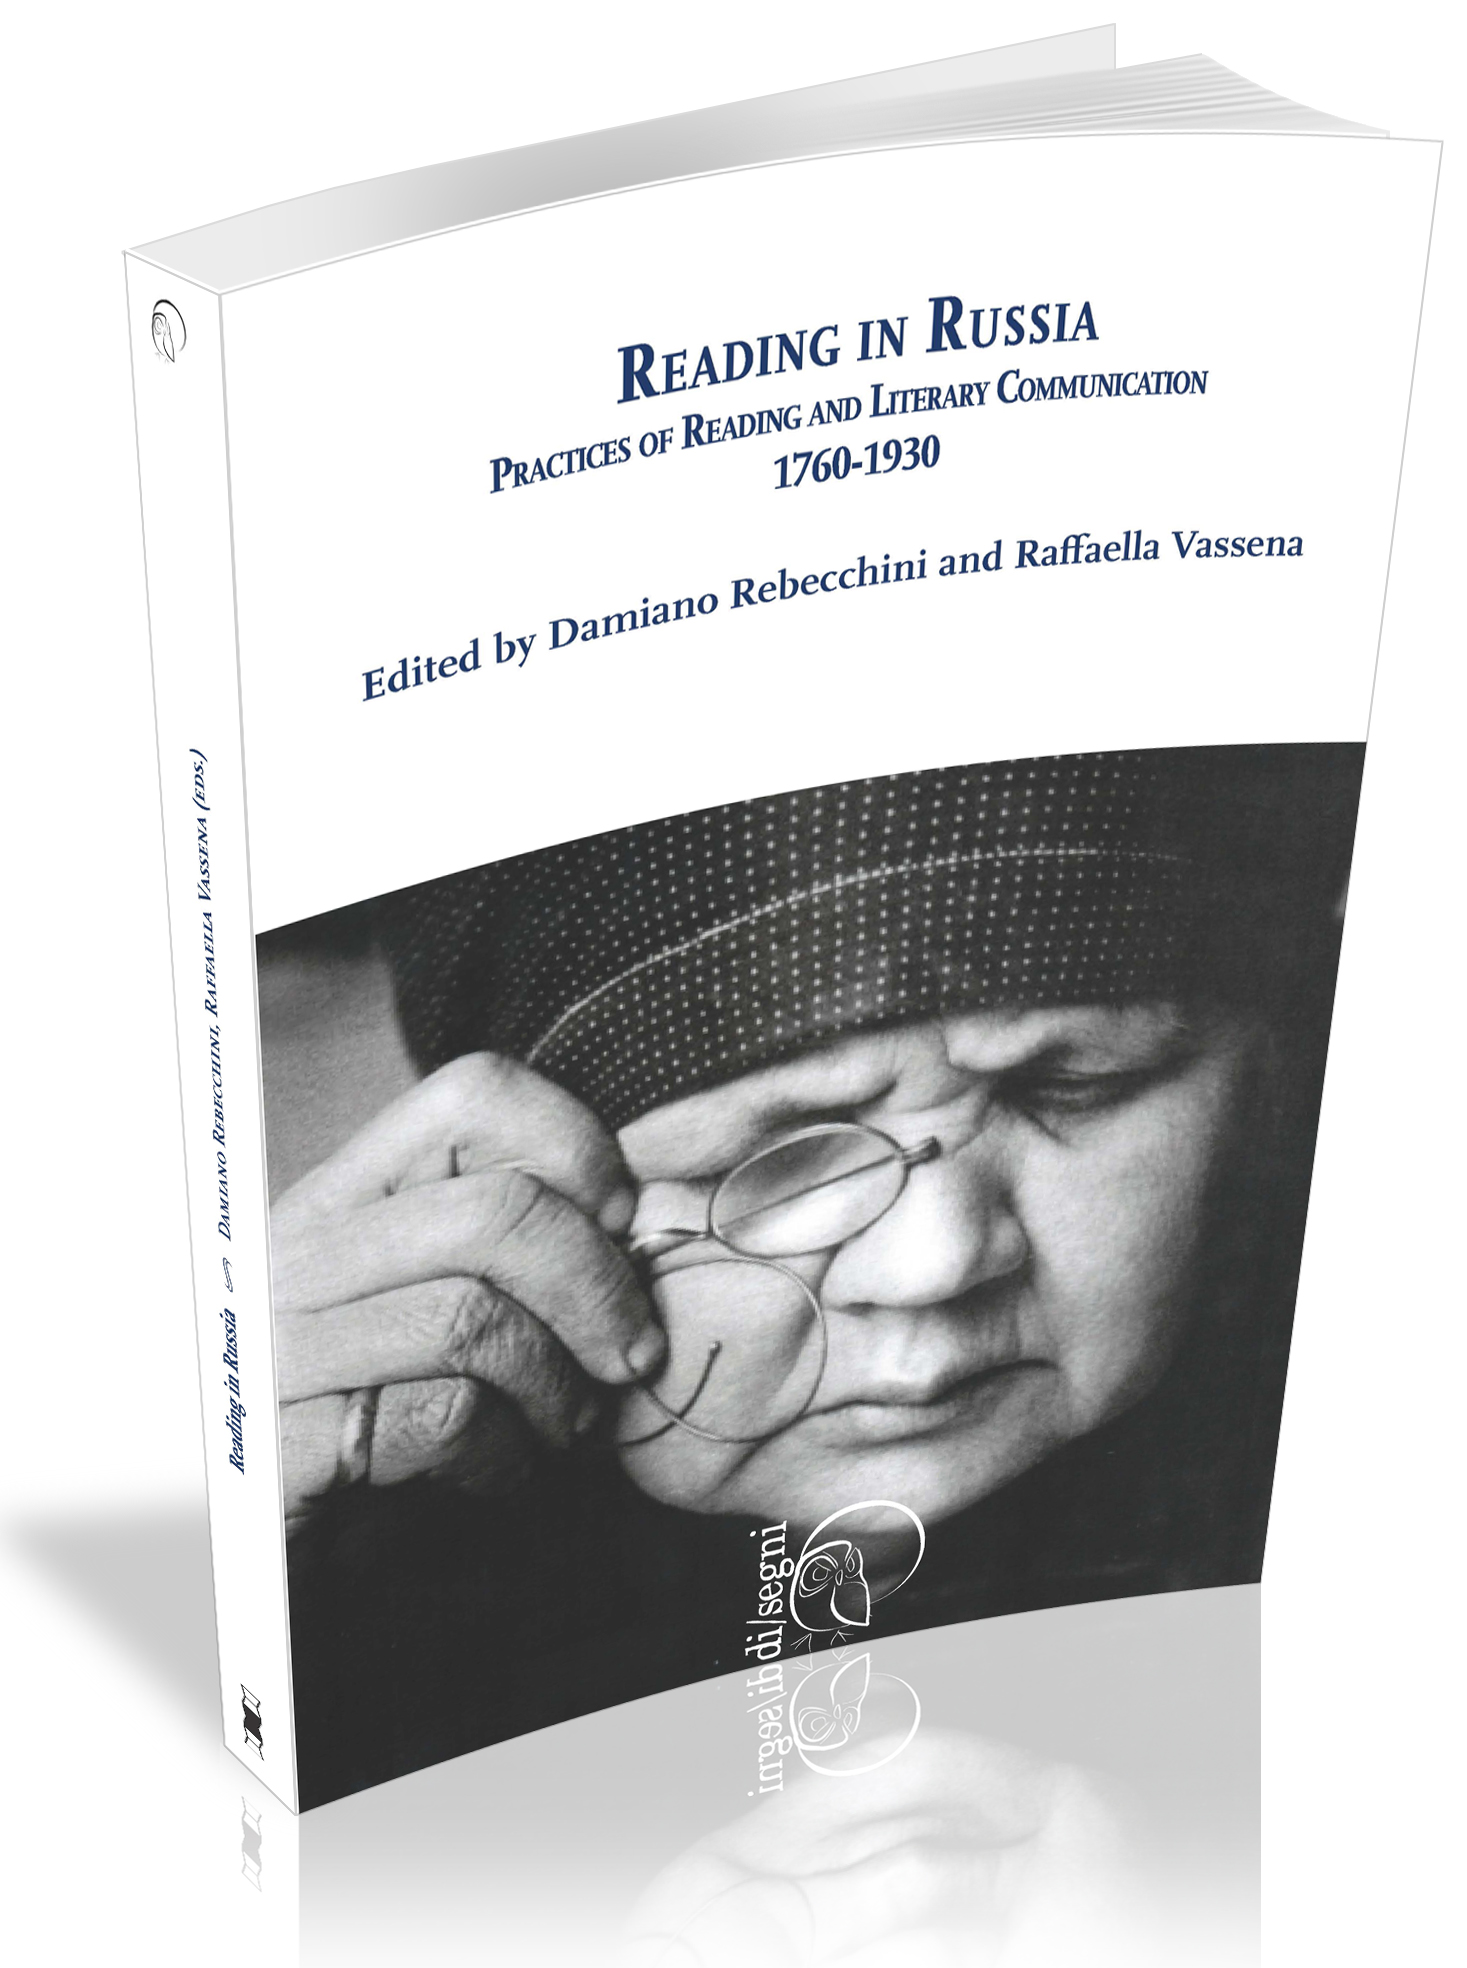 					Visualizza Reading in Russia. Practices of Reading and Literary Communication, 1760-1930
				